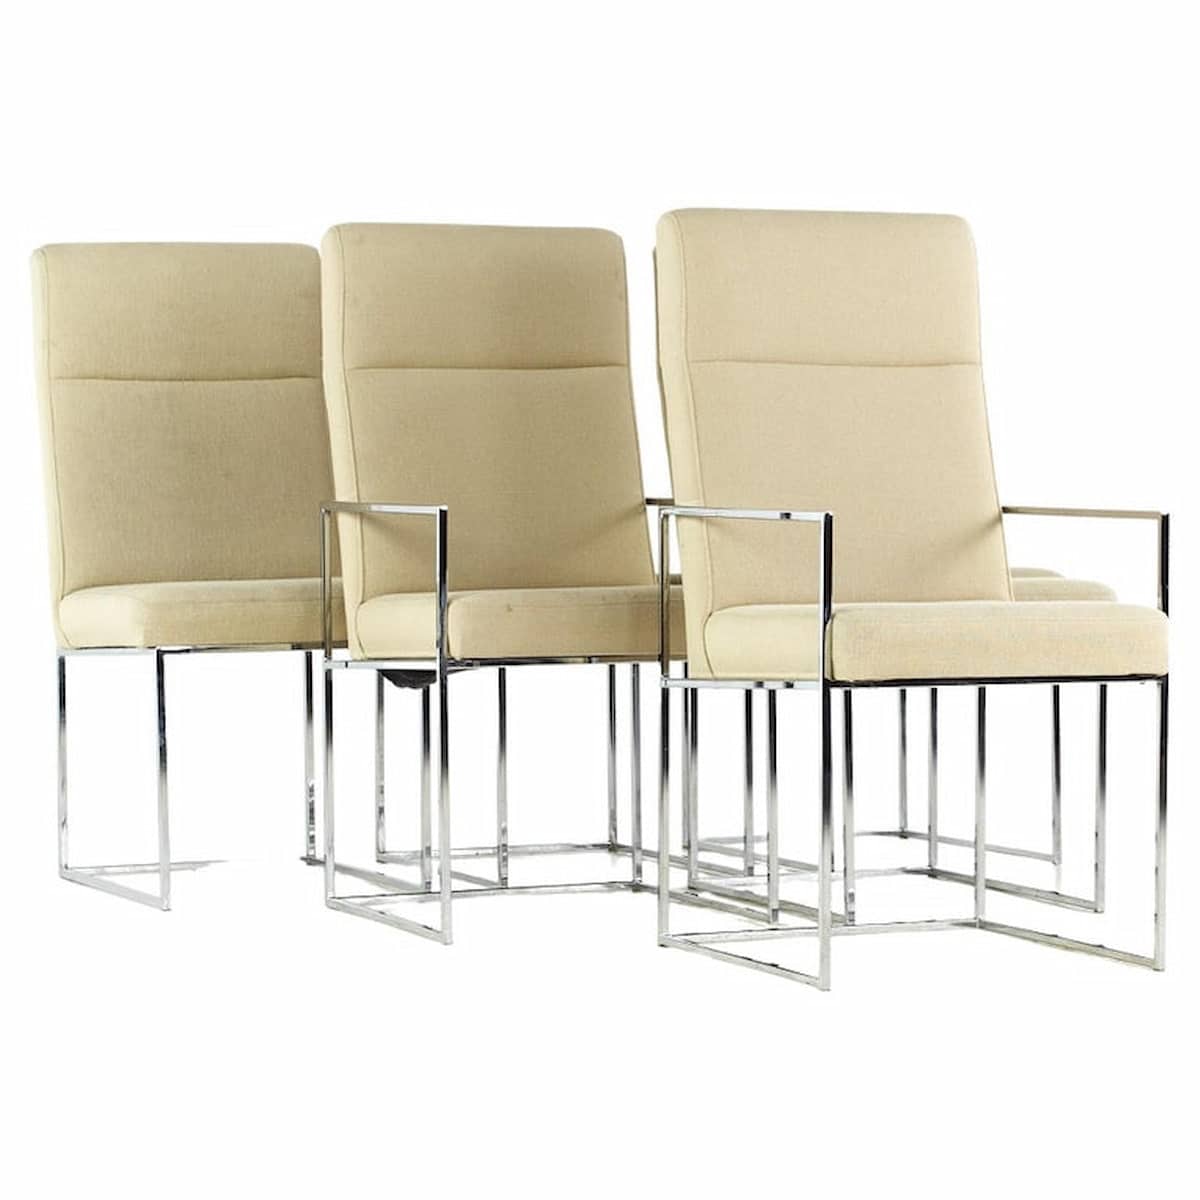 Milo Baughman for Thayer Coggin Style Mid Century Chrome Dining Chairs - Set of 6